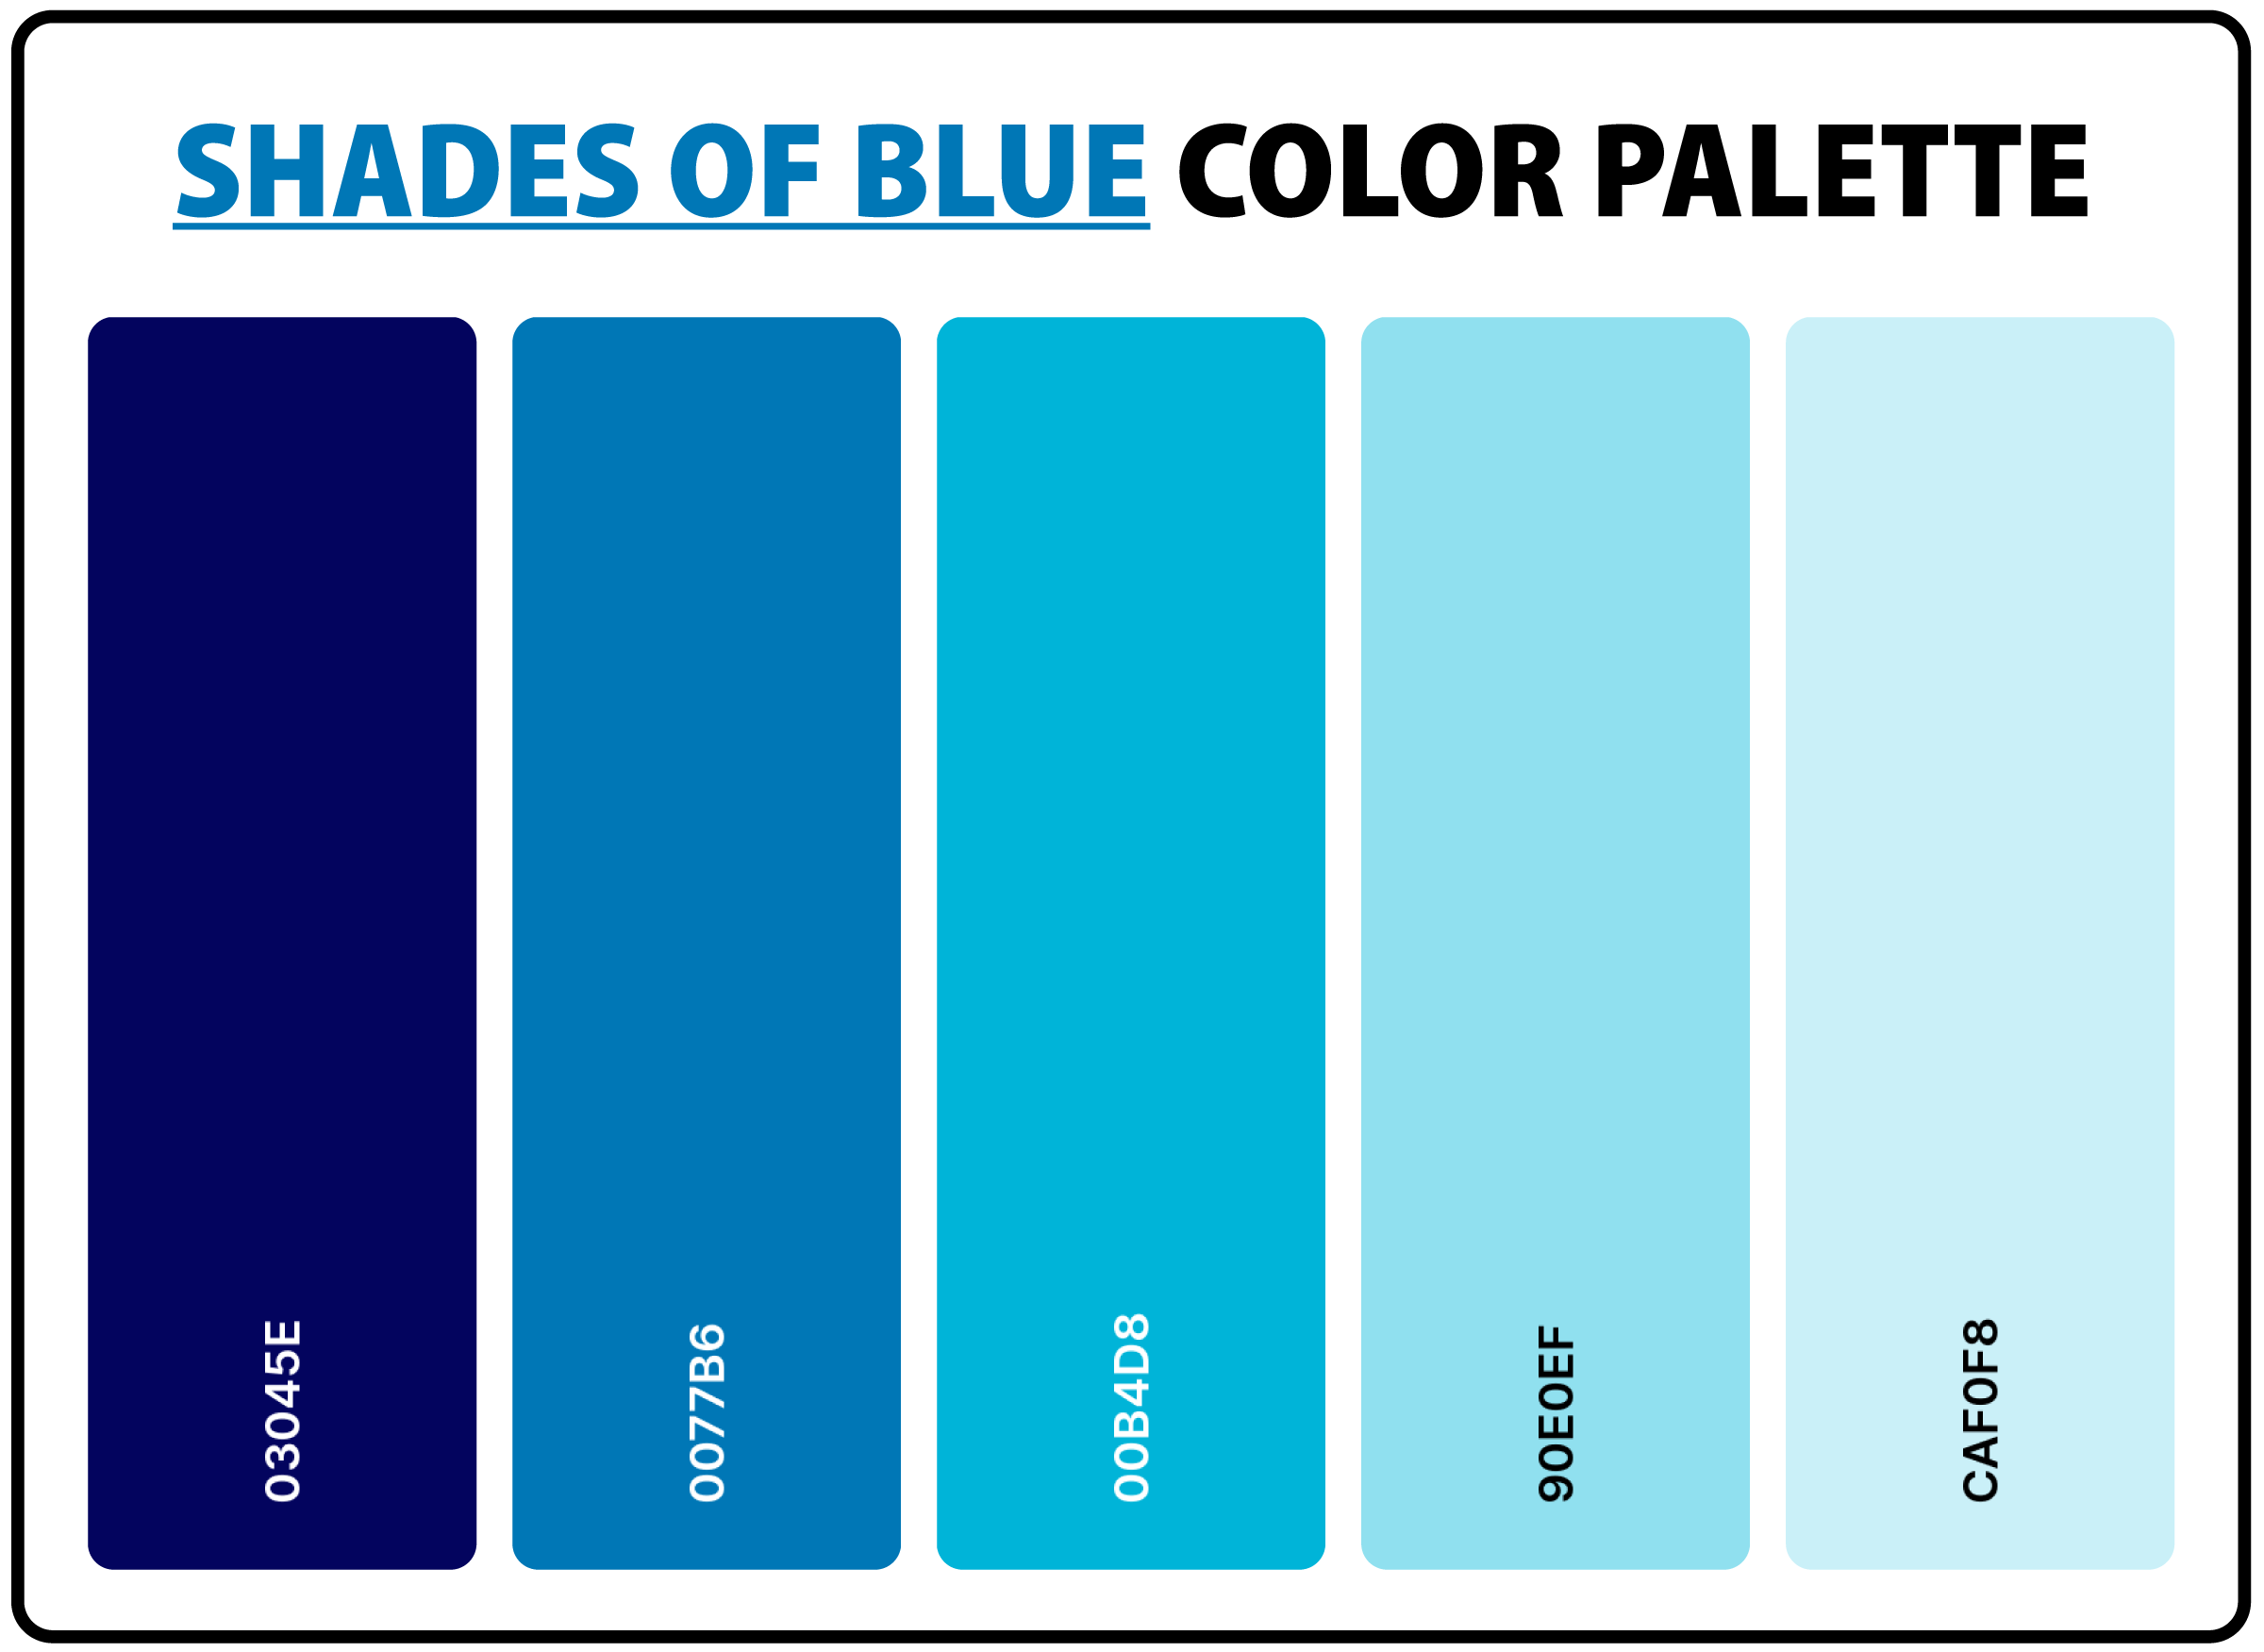 Shades-of-Blue-Color-Palette-with-Hex-Codes